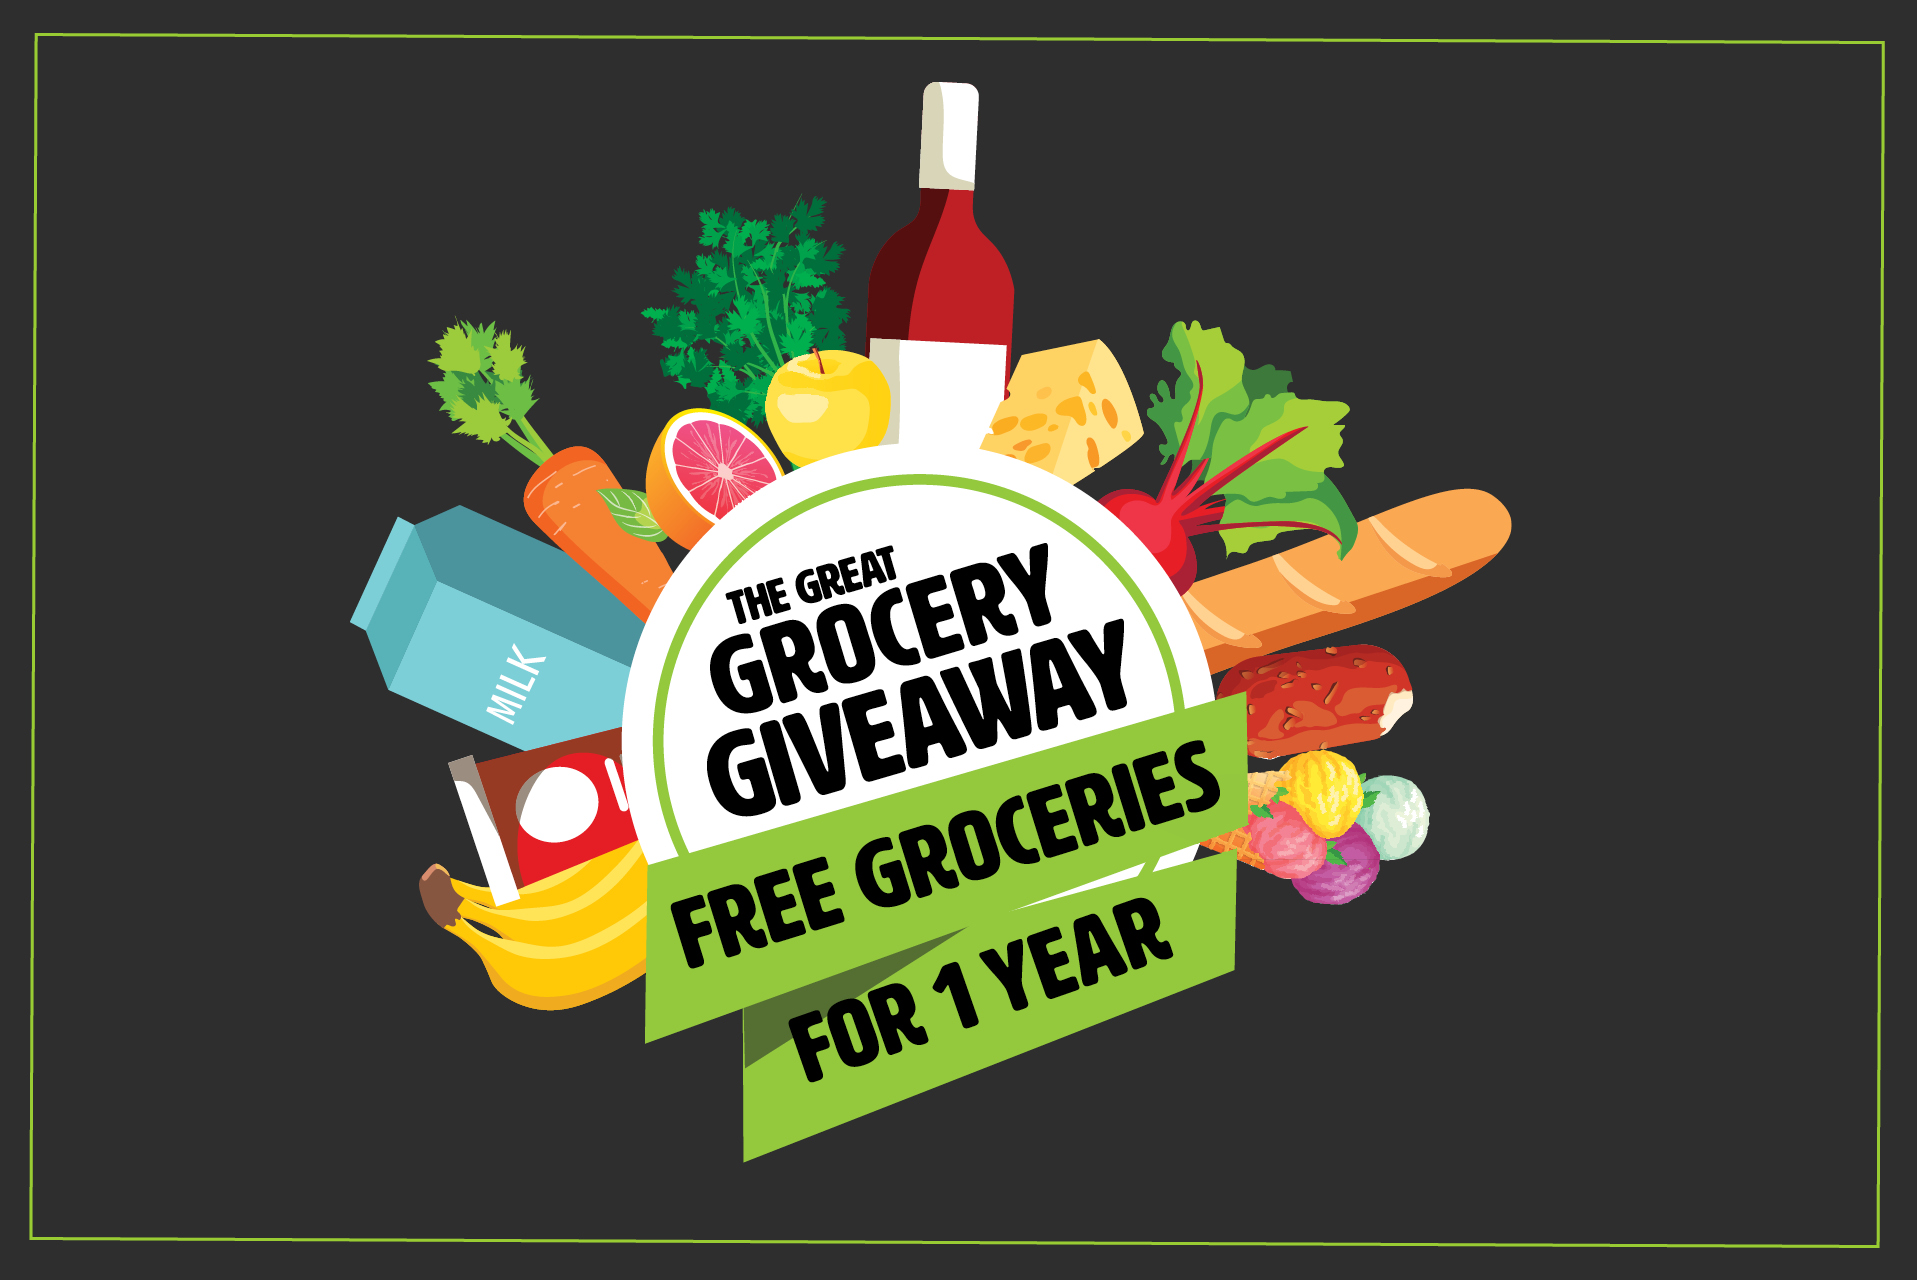 West SEattle Thridftway's Great Grocery Giveaway